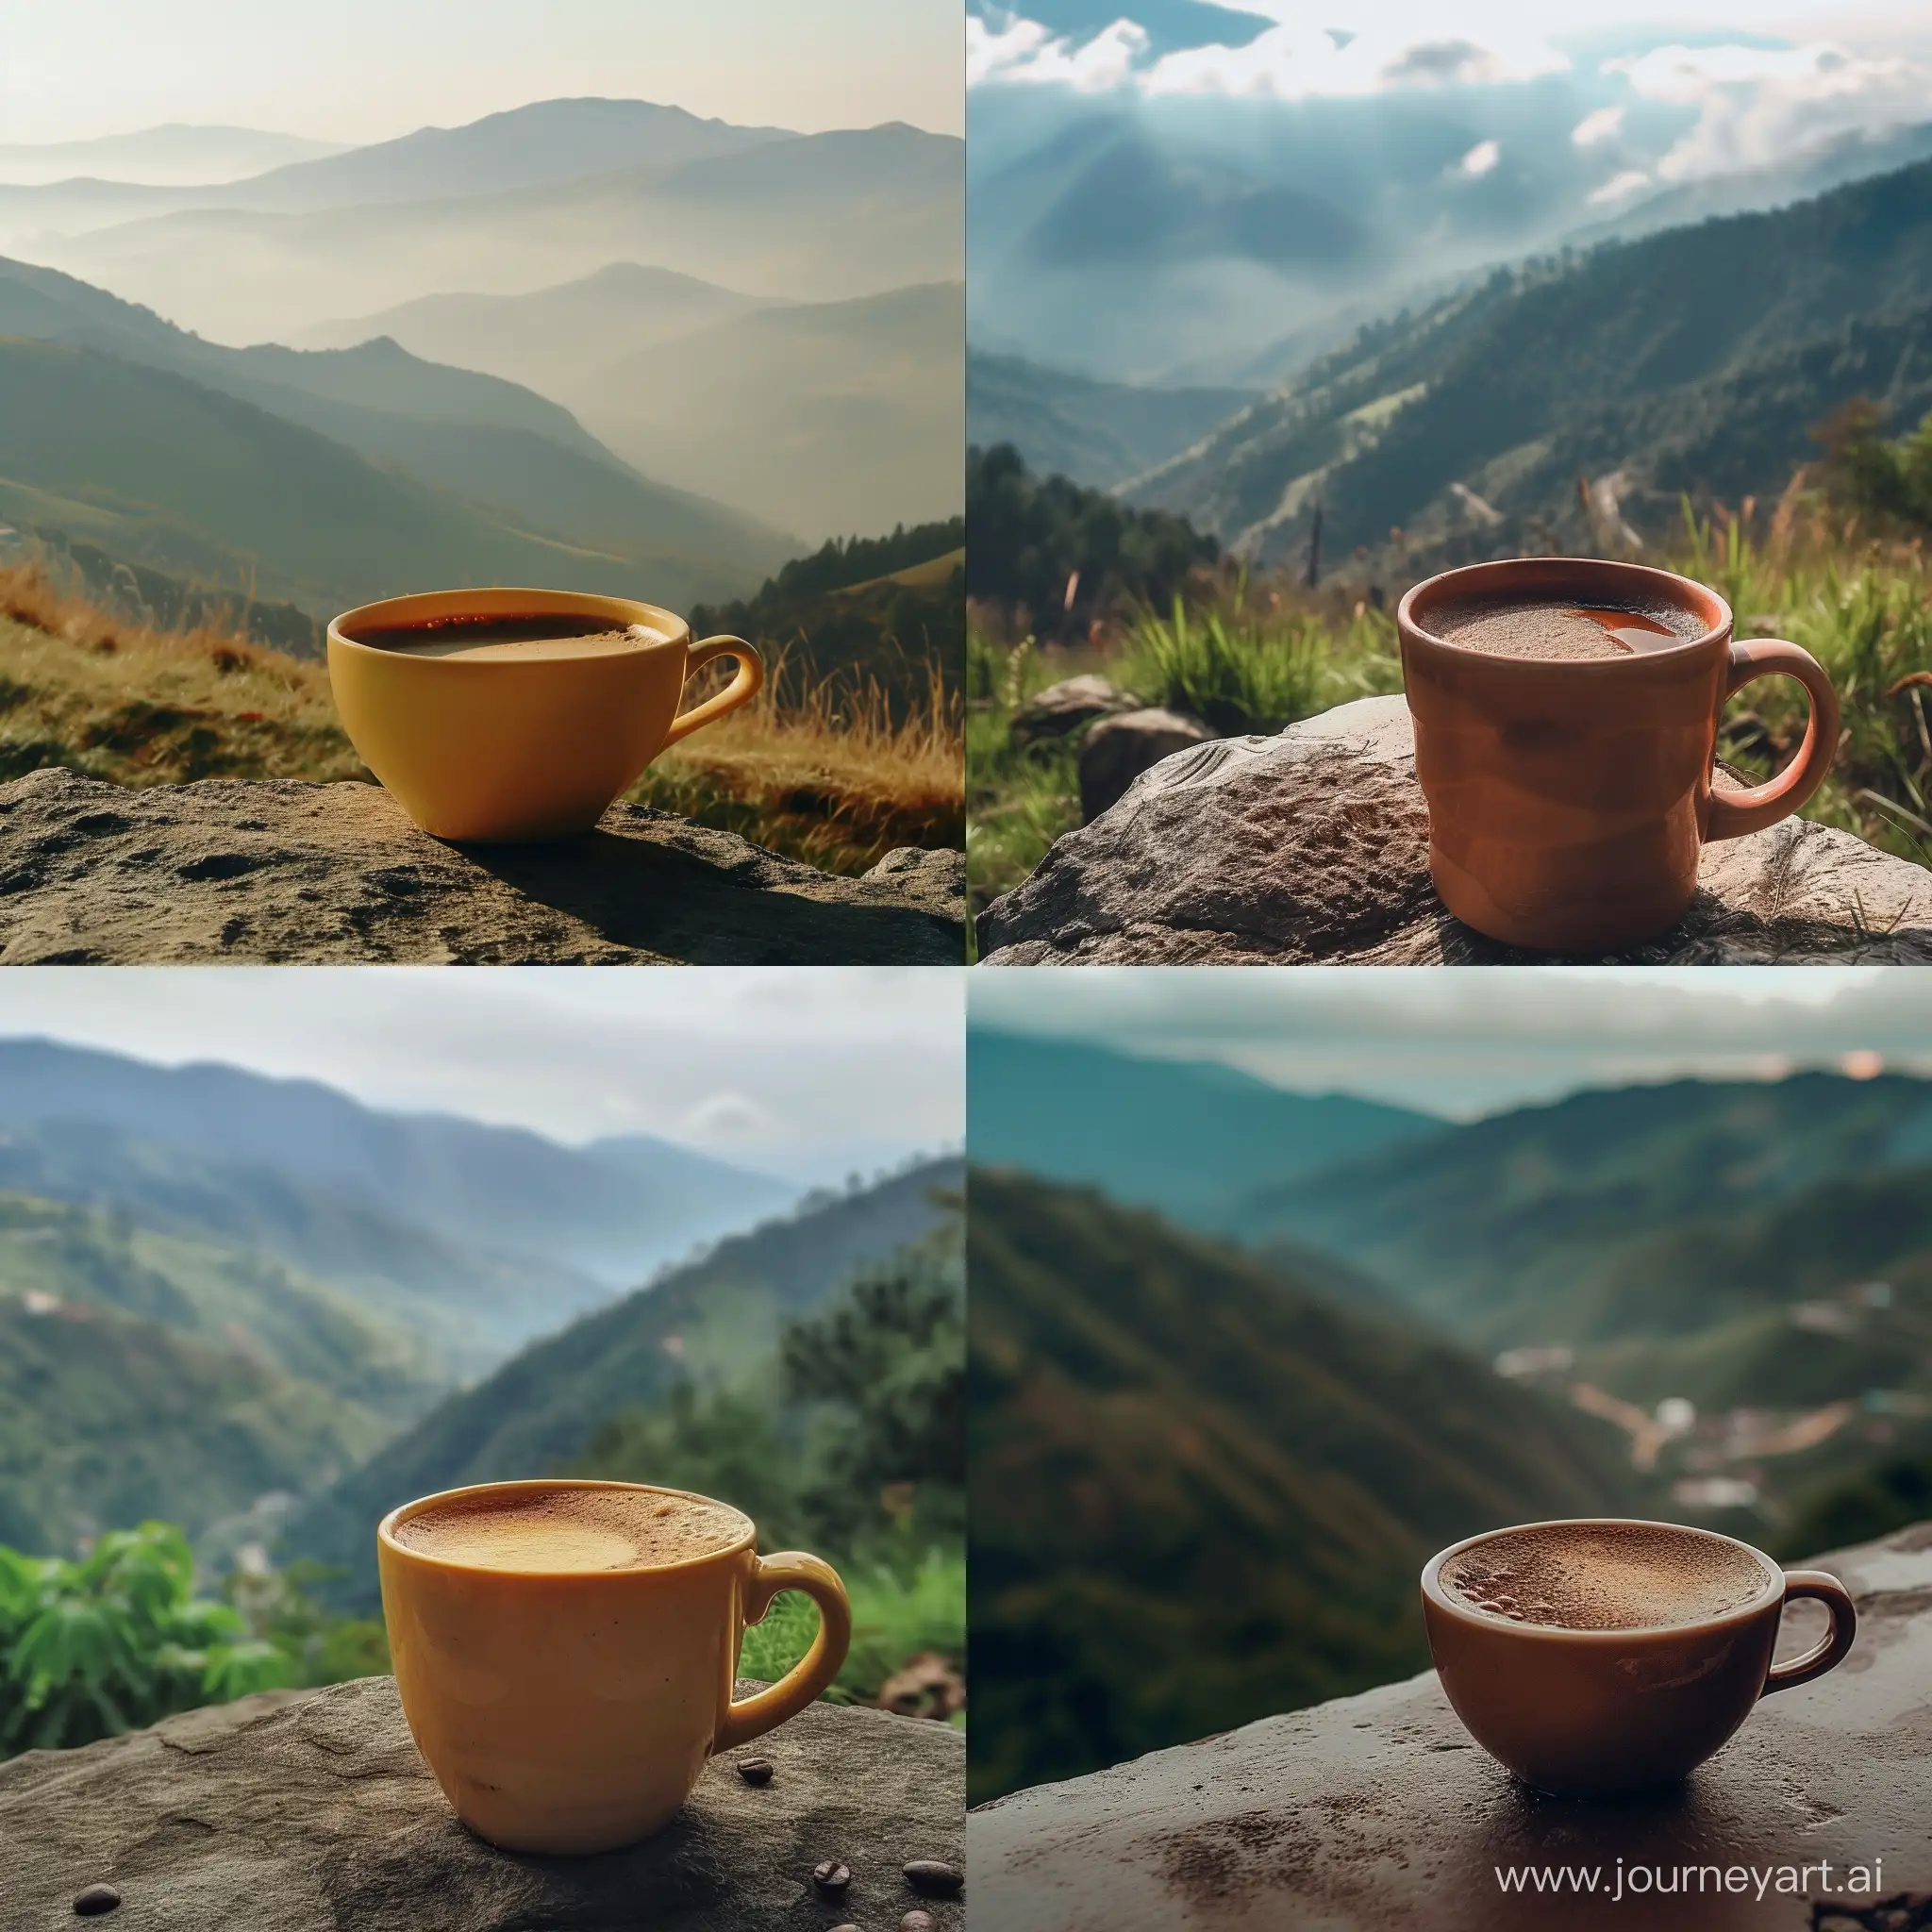 Coffee-Cup-on-Mountain-Hills-Serene-Morning-Landscape-with-Steaming-Coffee-Mug